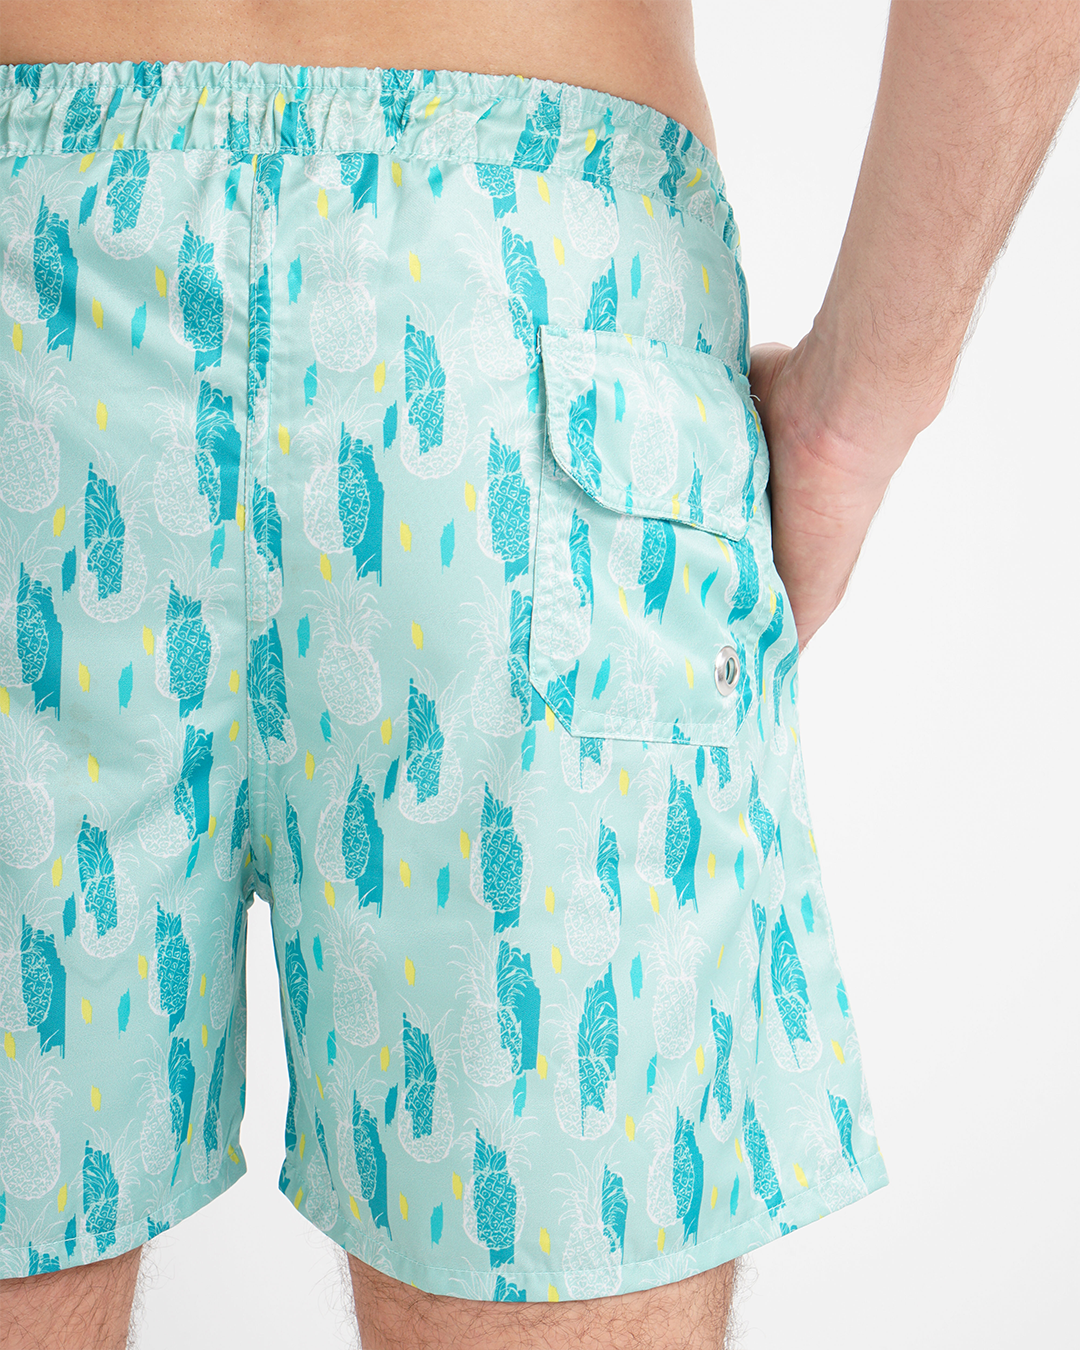 Men's swimsuit shorts with pineapple print